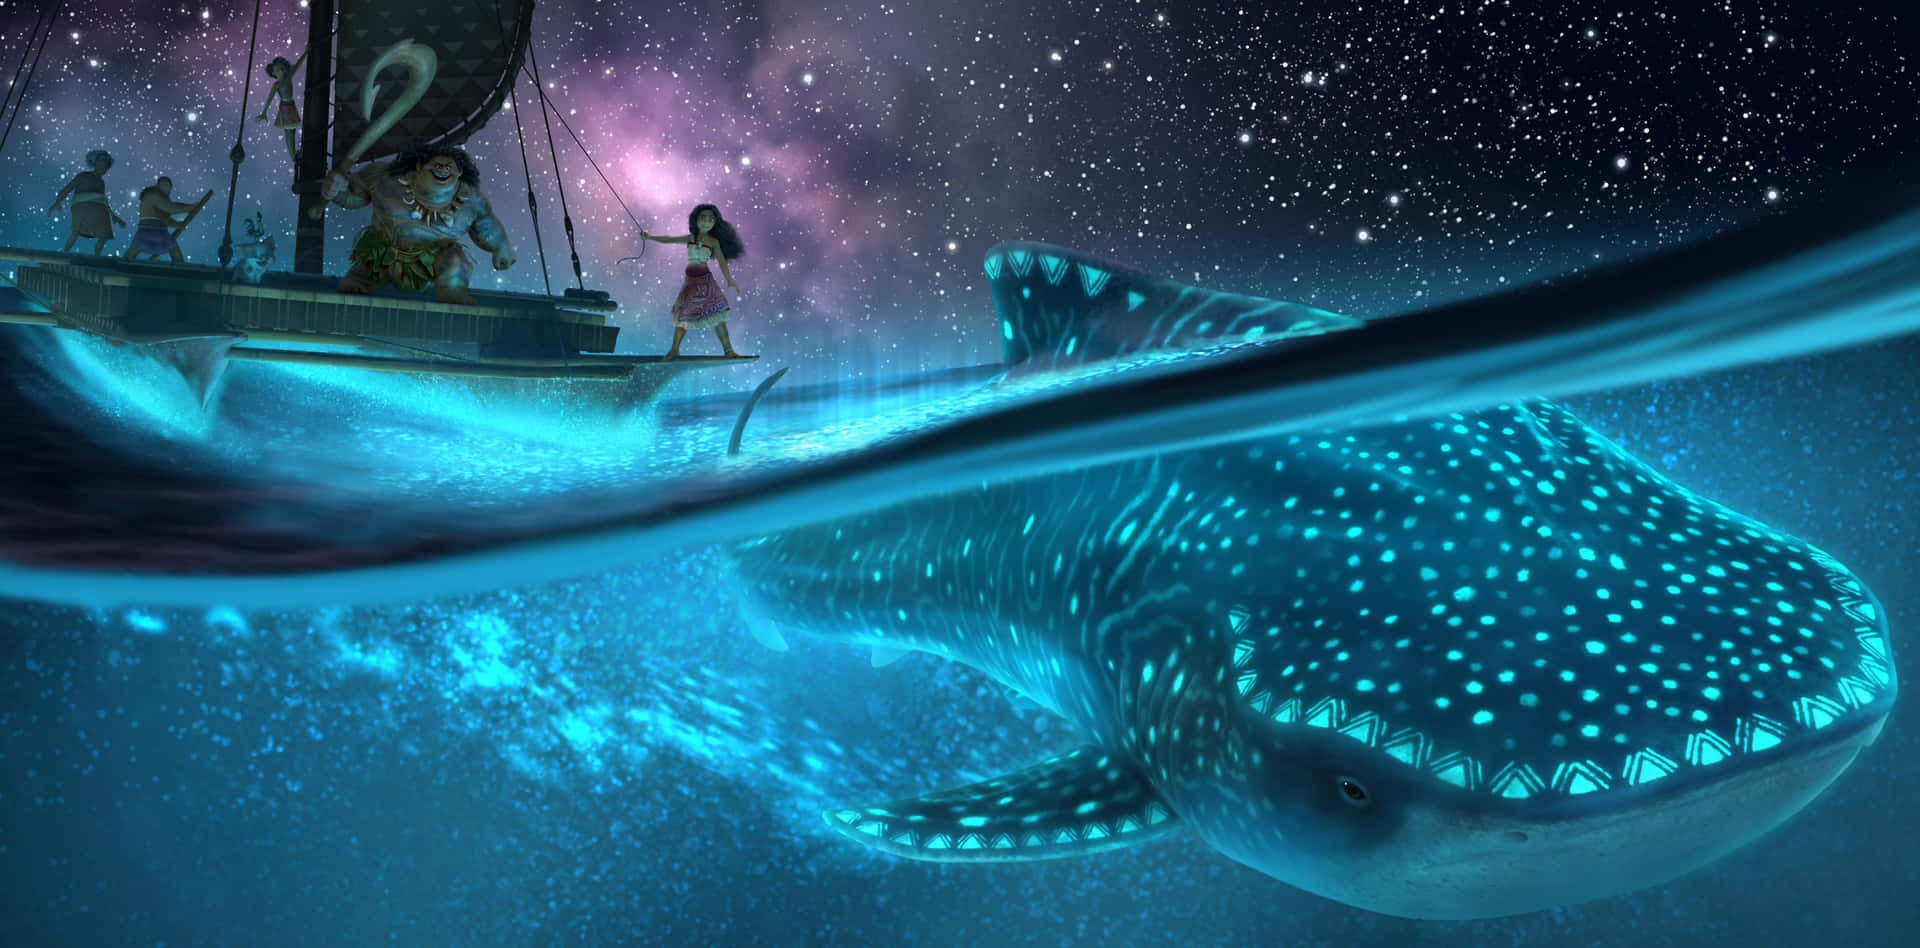 Moana Night Voyagewith Whale Wallpaper